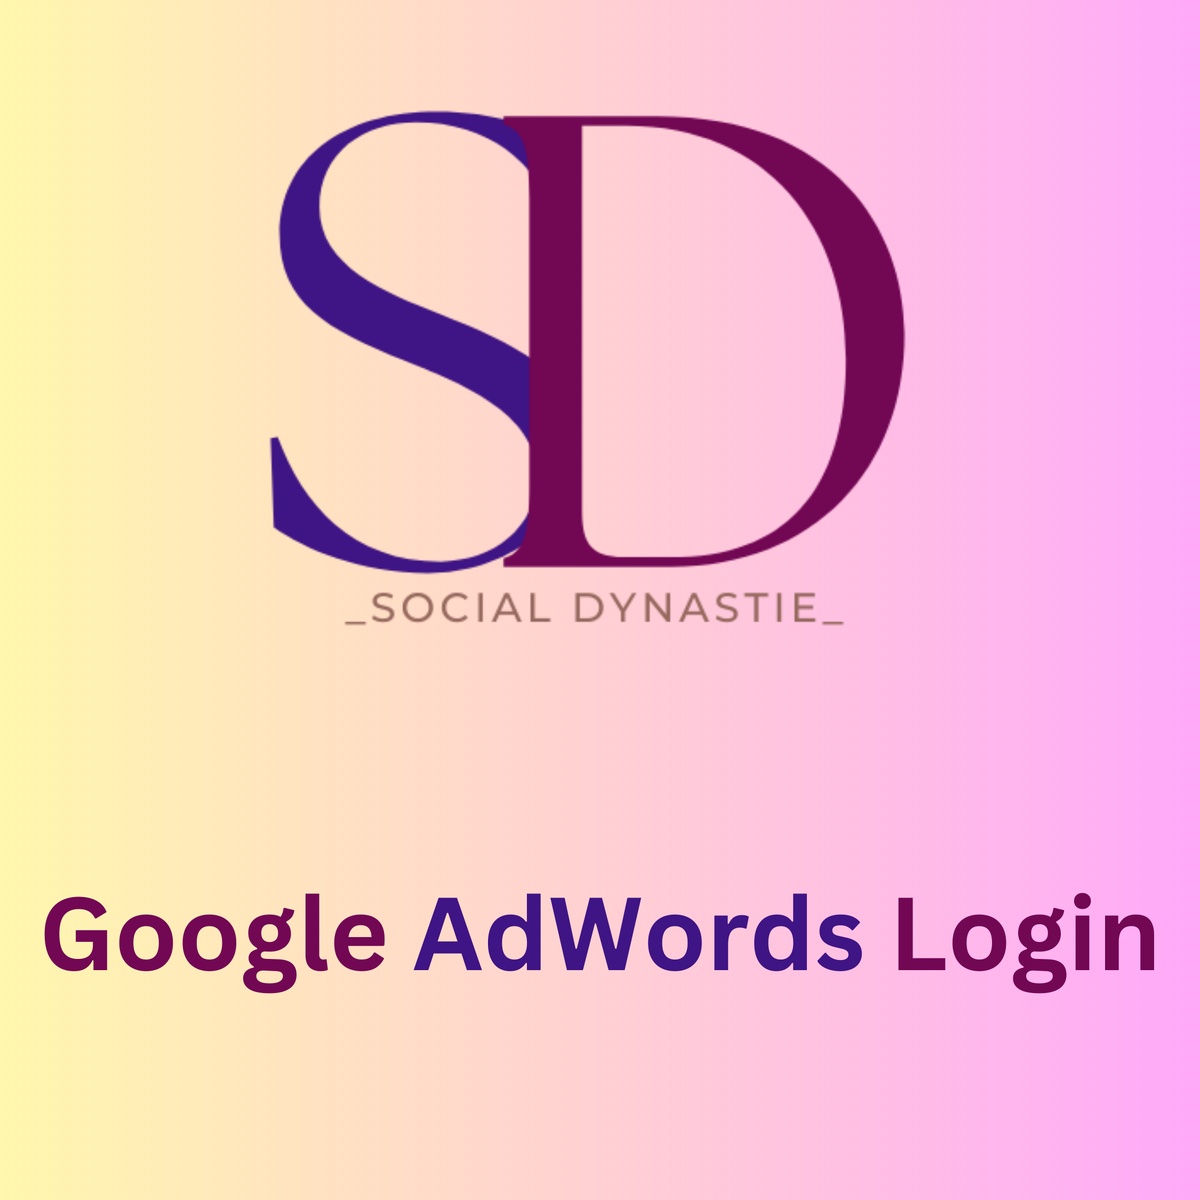 Google AdWords Login | A Way To Grow Your Business Sales